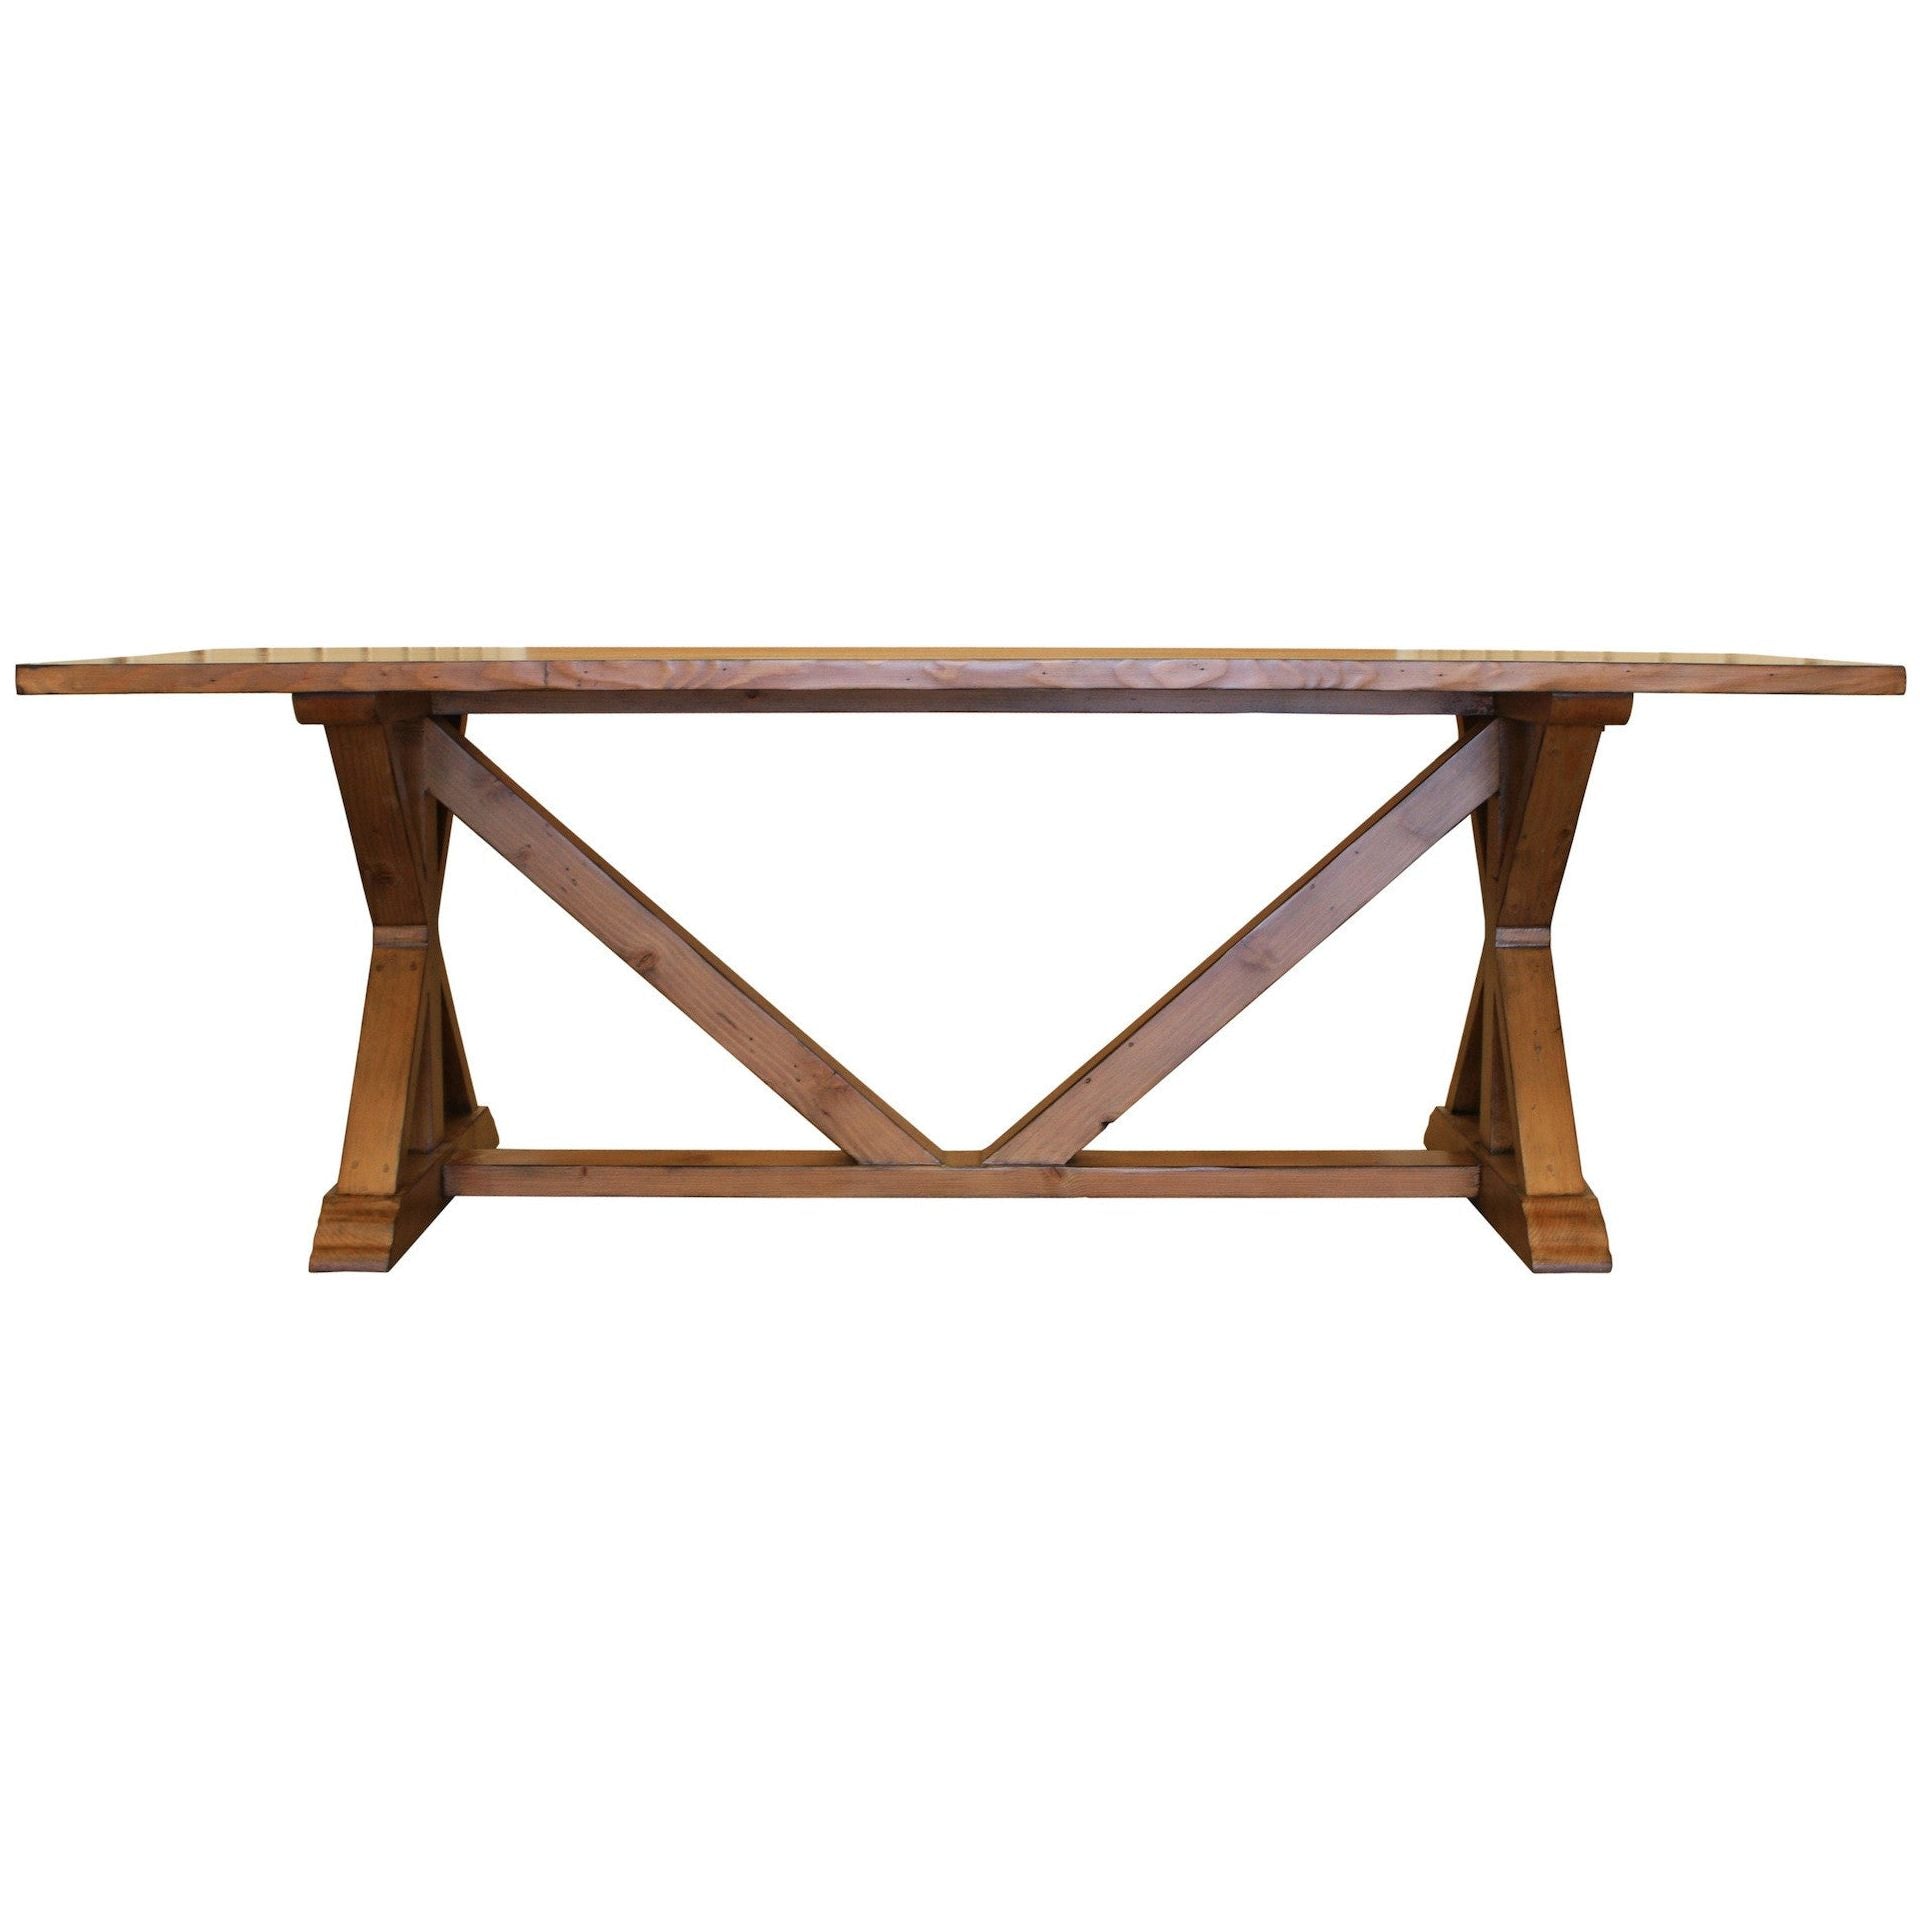  handmade Country Trestle Refectory Dining Table